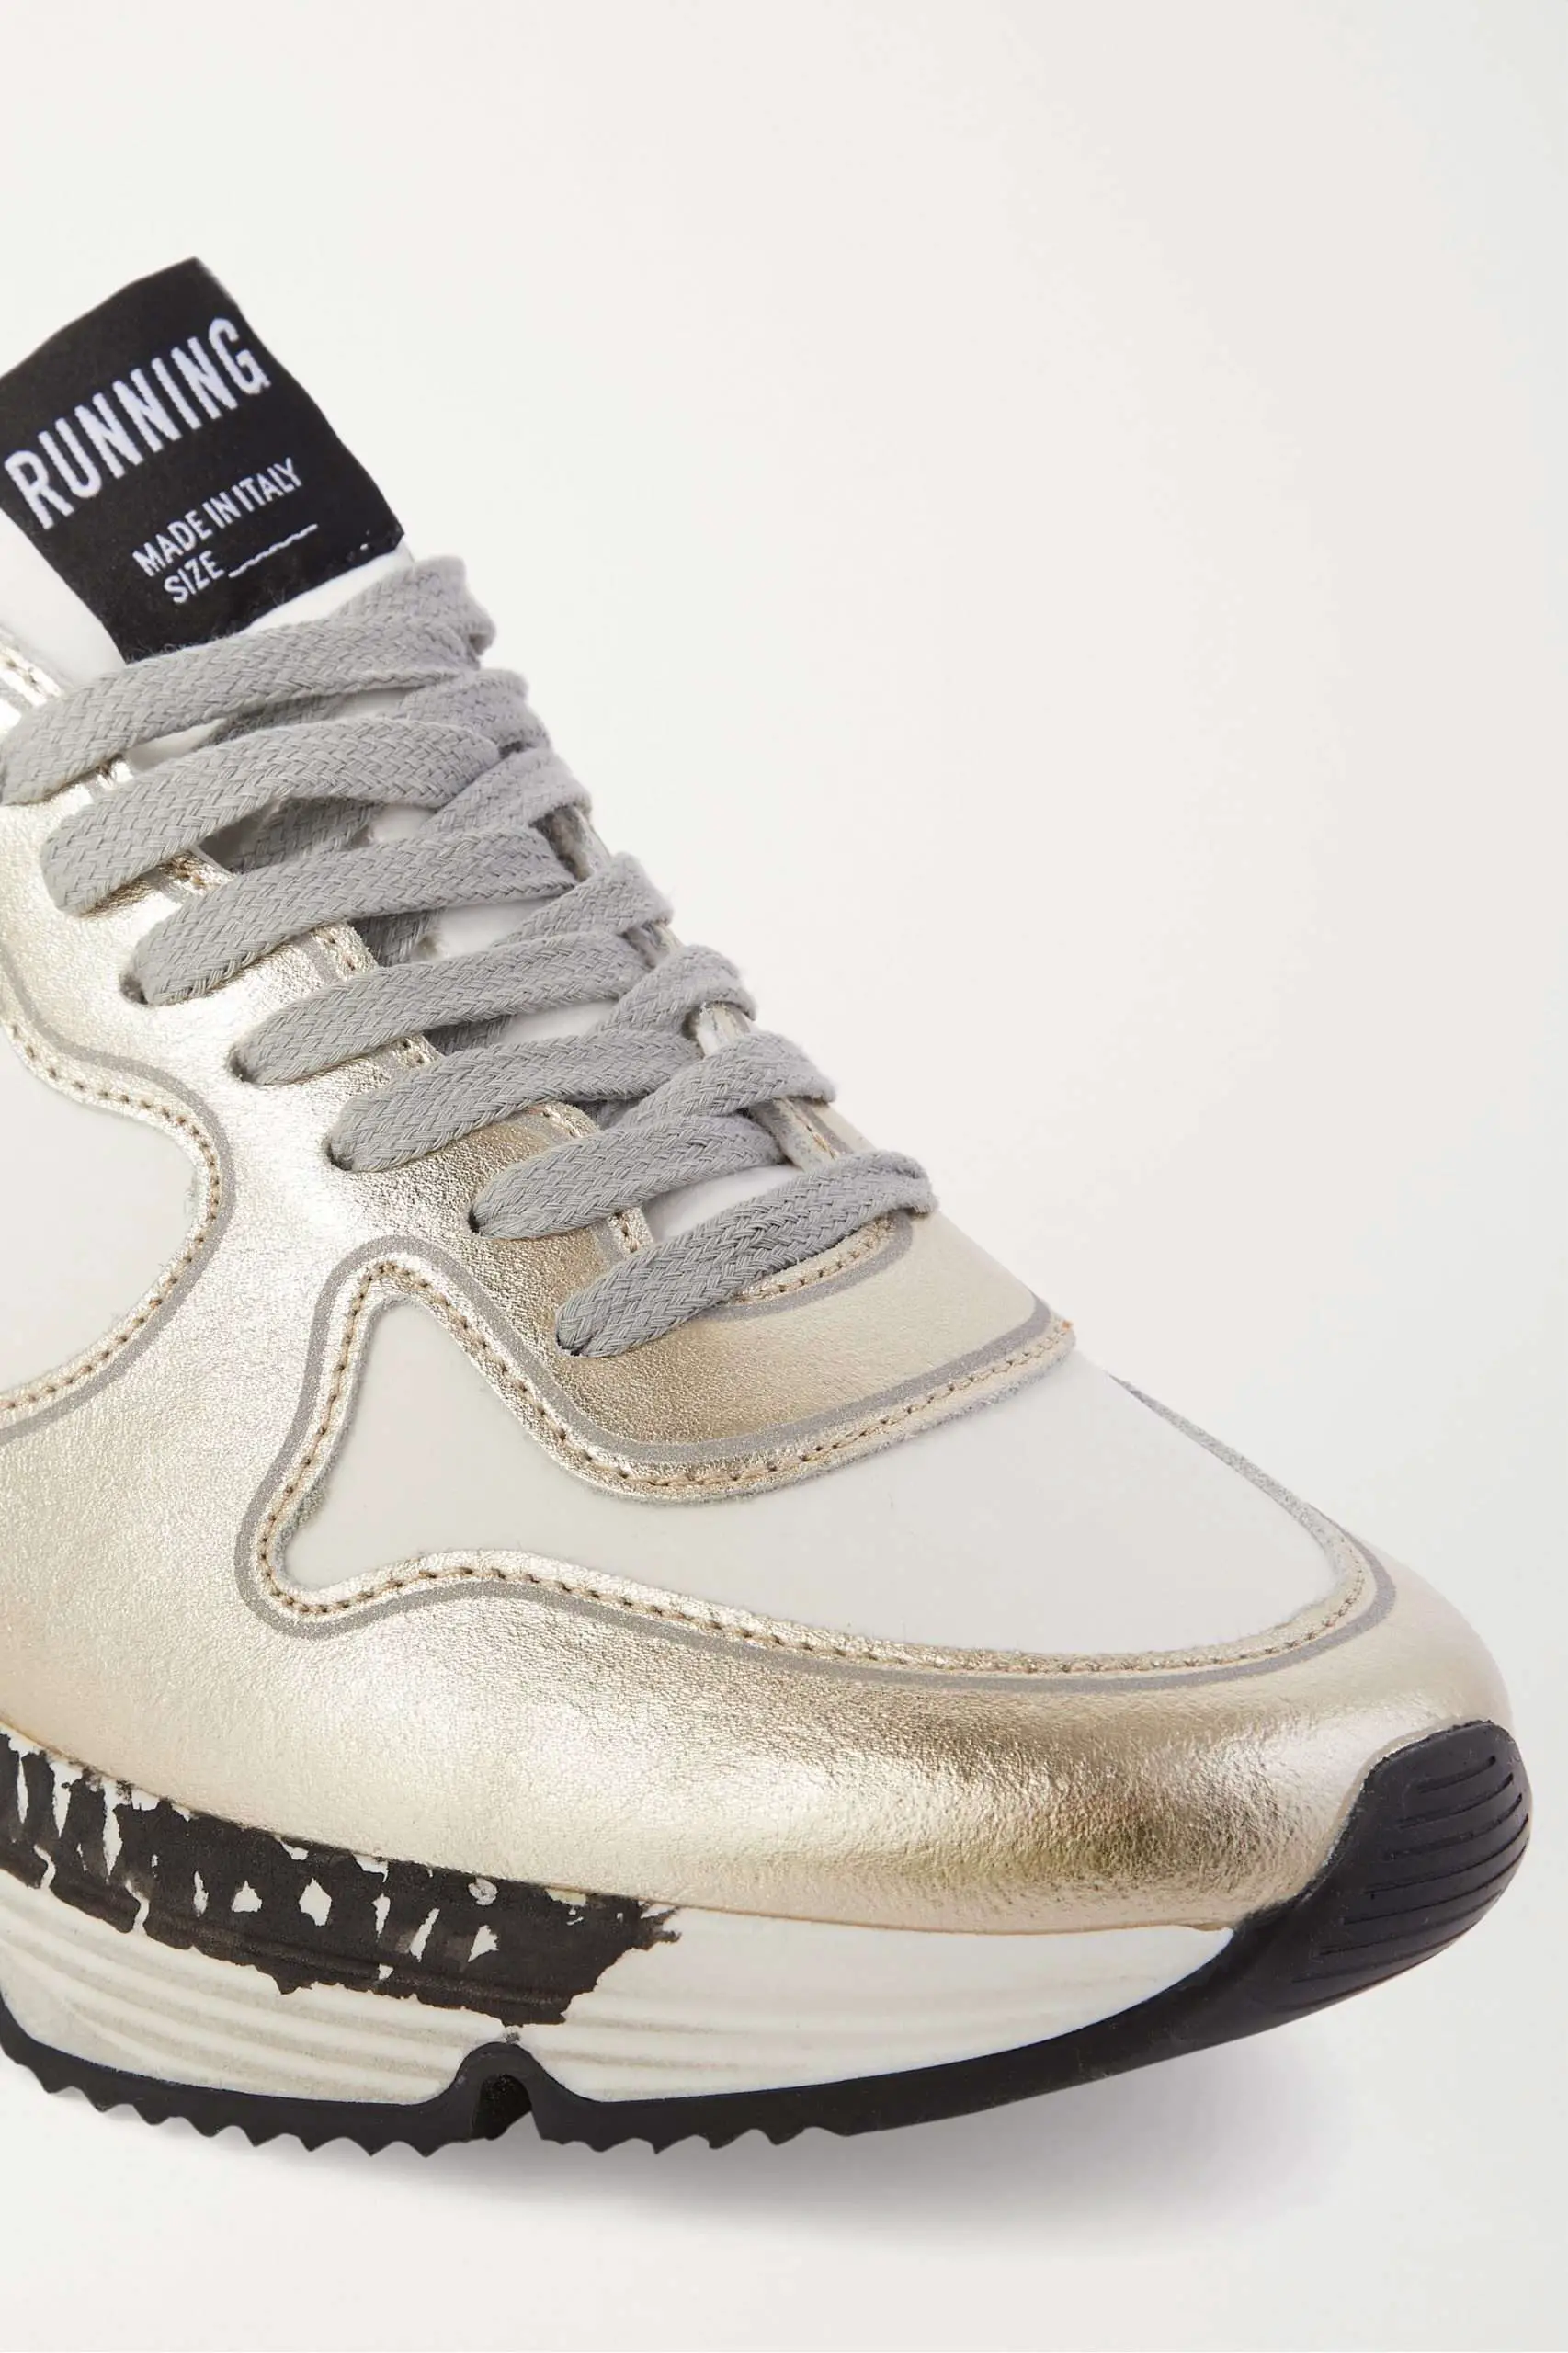 Do Golden Goose Run True To Size : The Pros And Cons Of Golden Goose ...